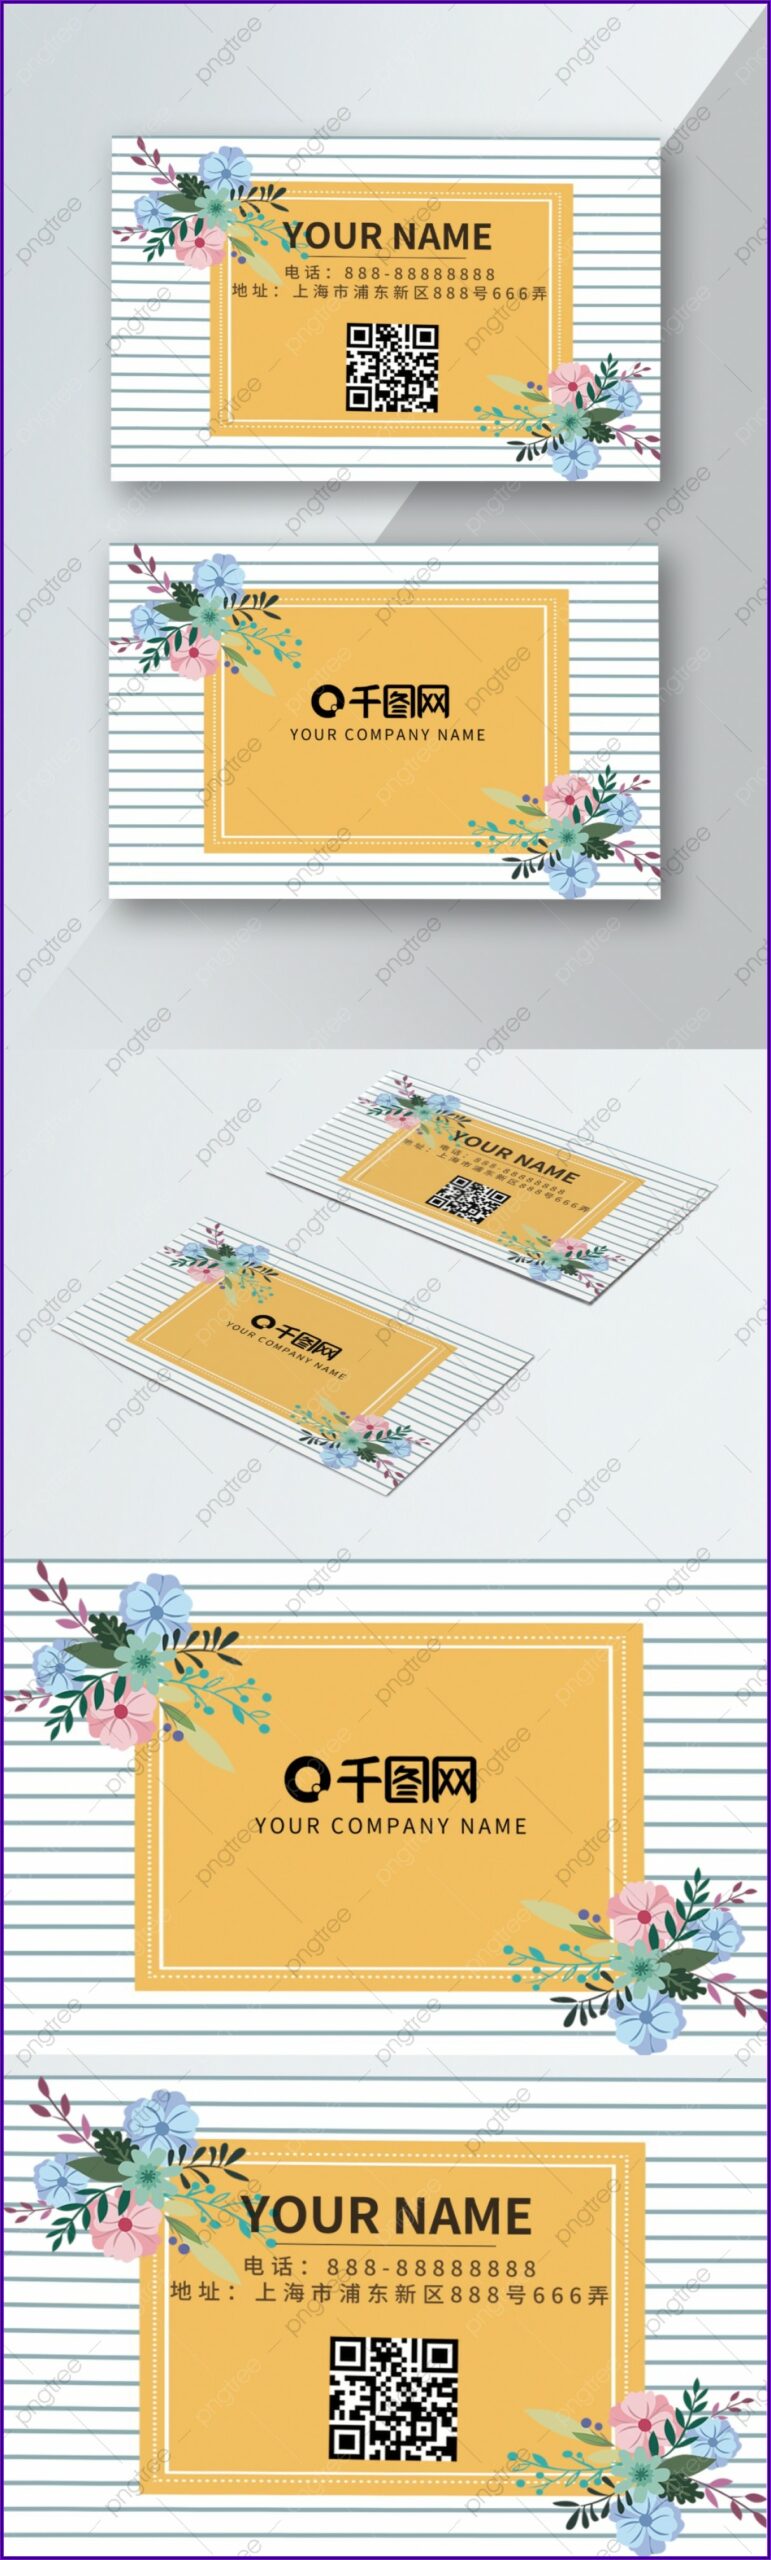 Cleaning Company Business Card Template